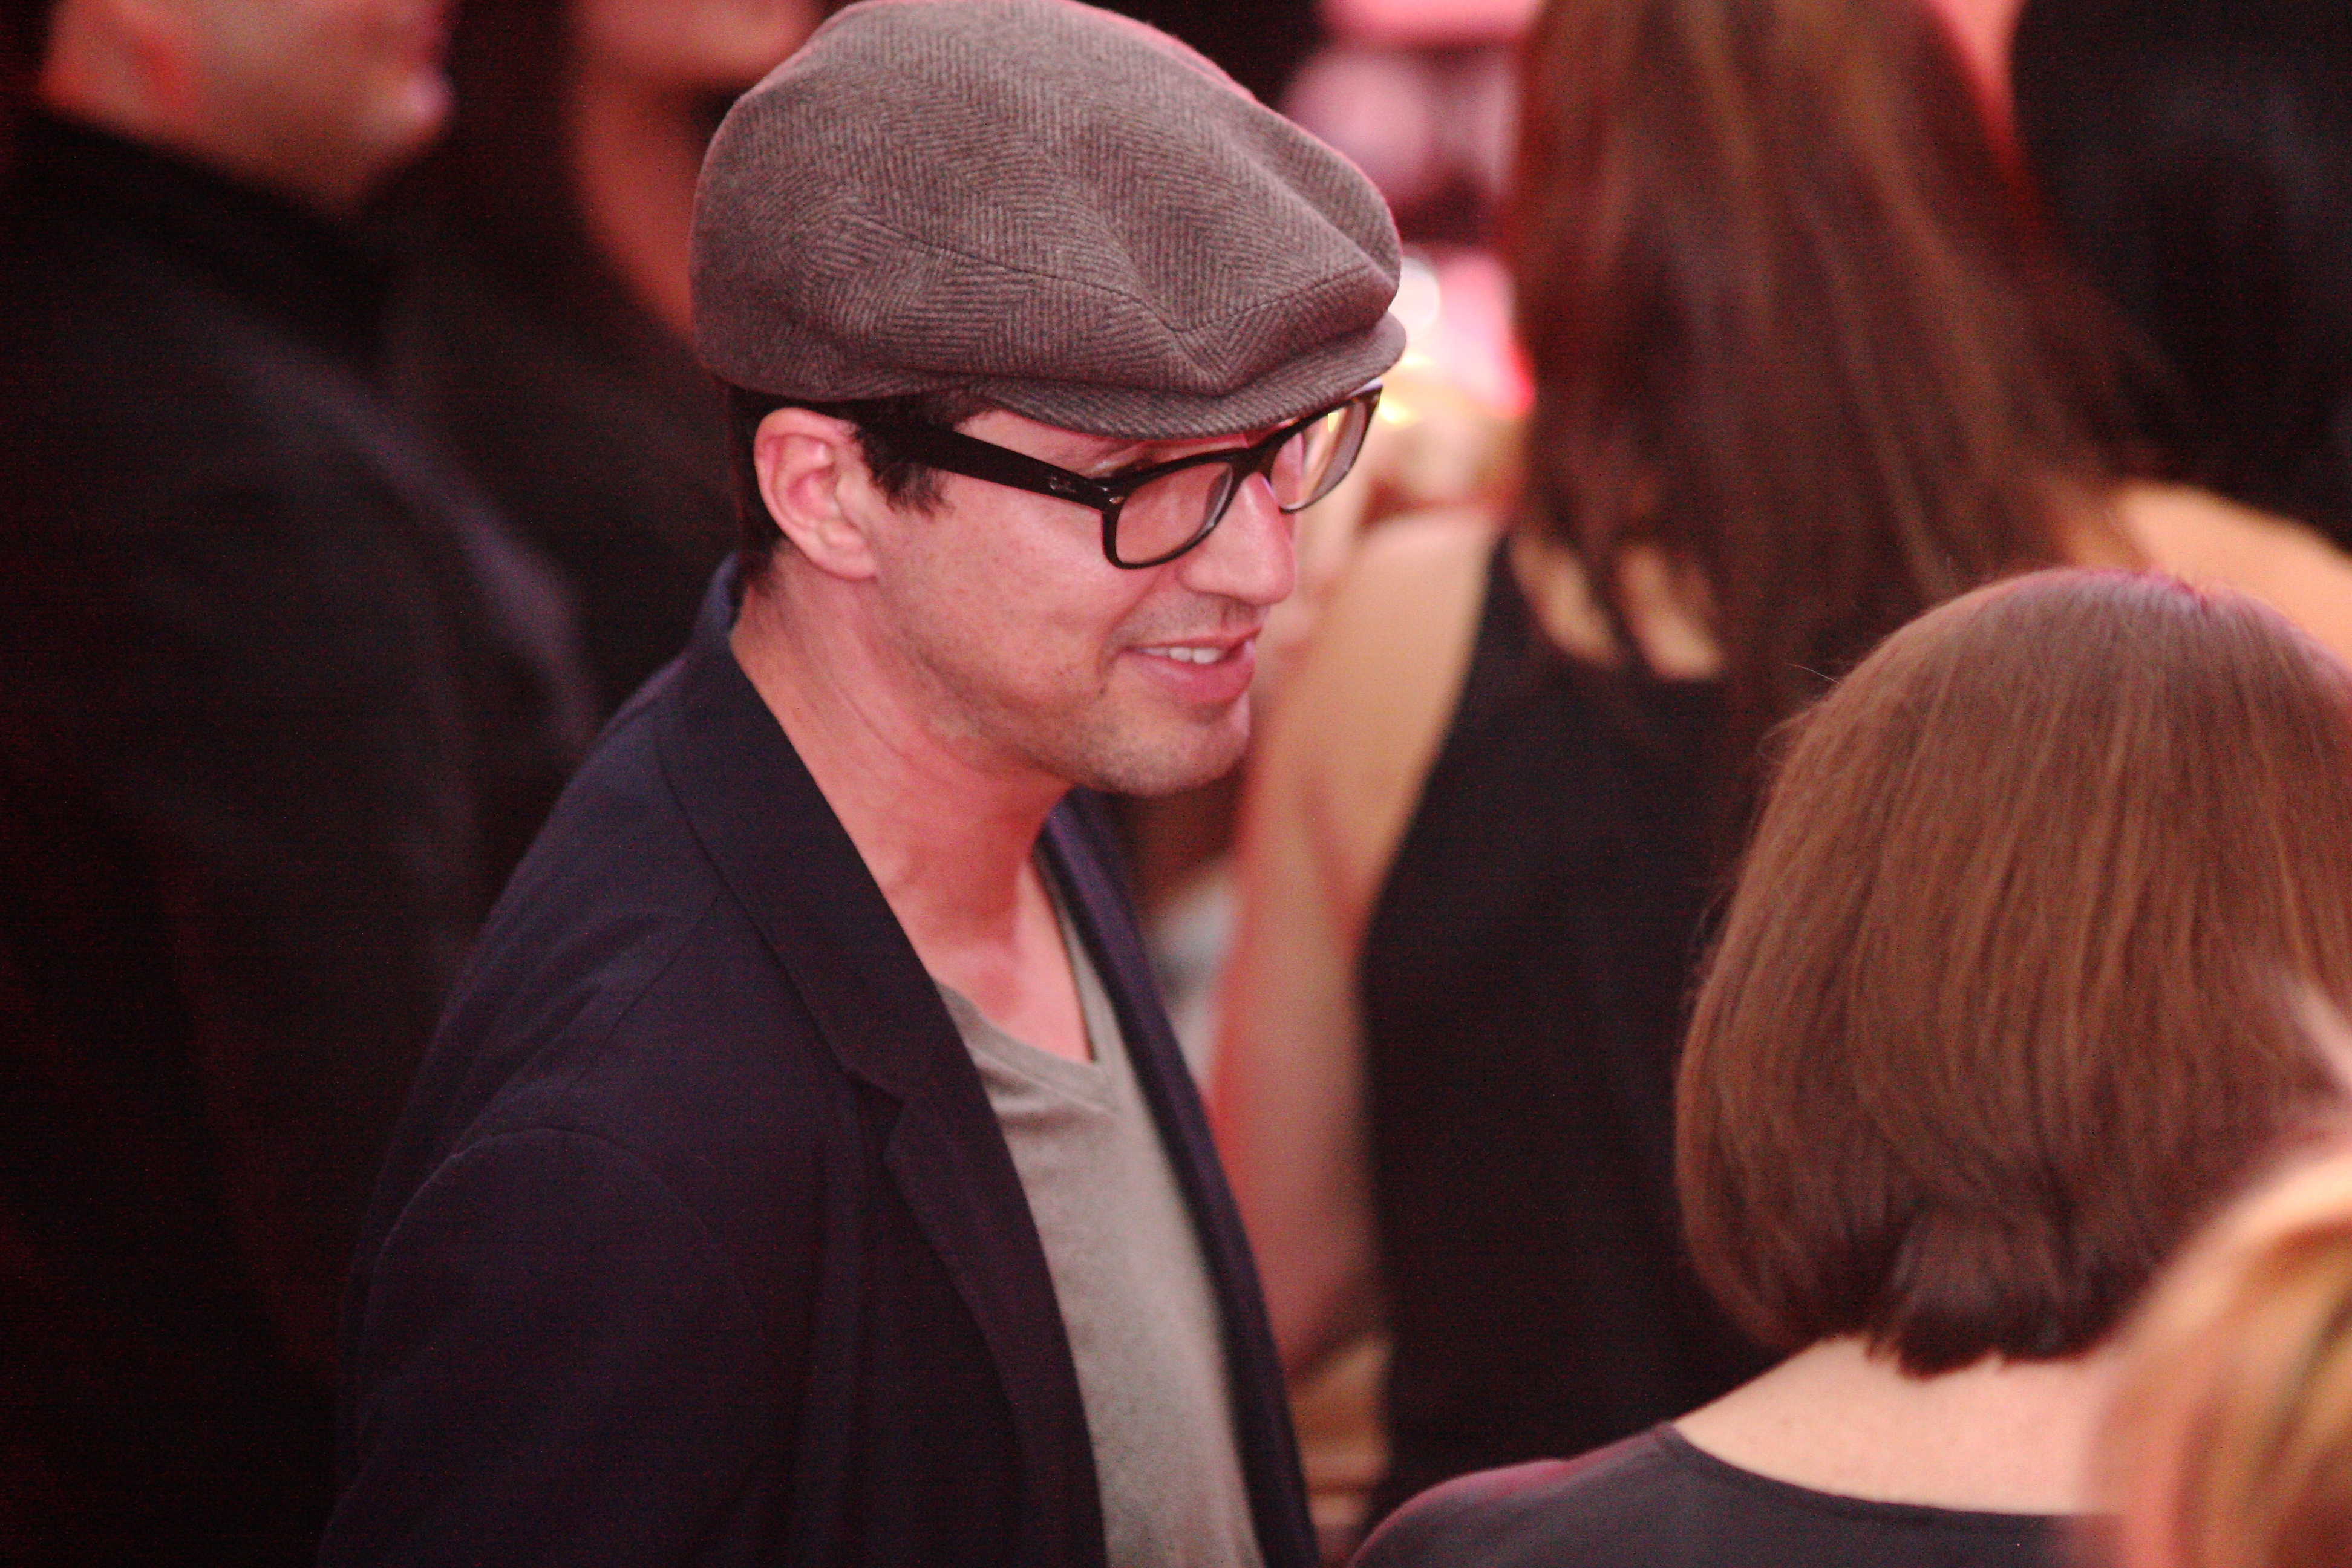 Writer/Director Quincy Rose at the premier party for his film 